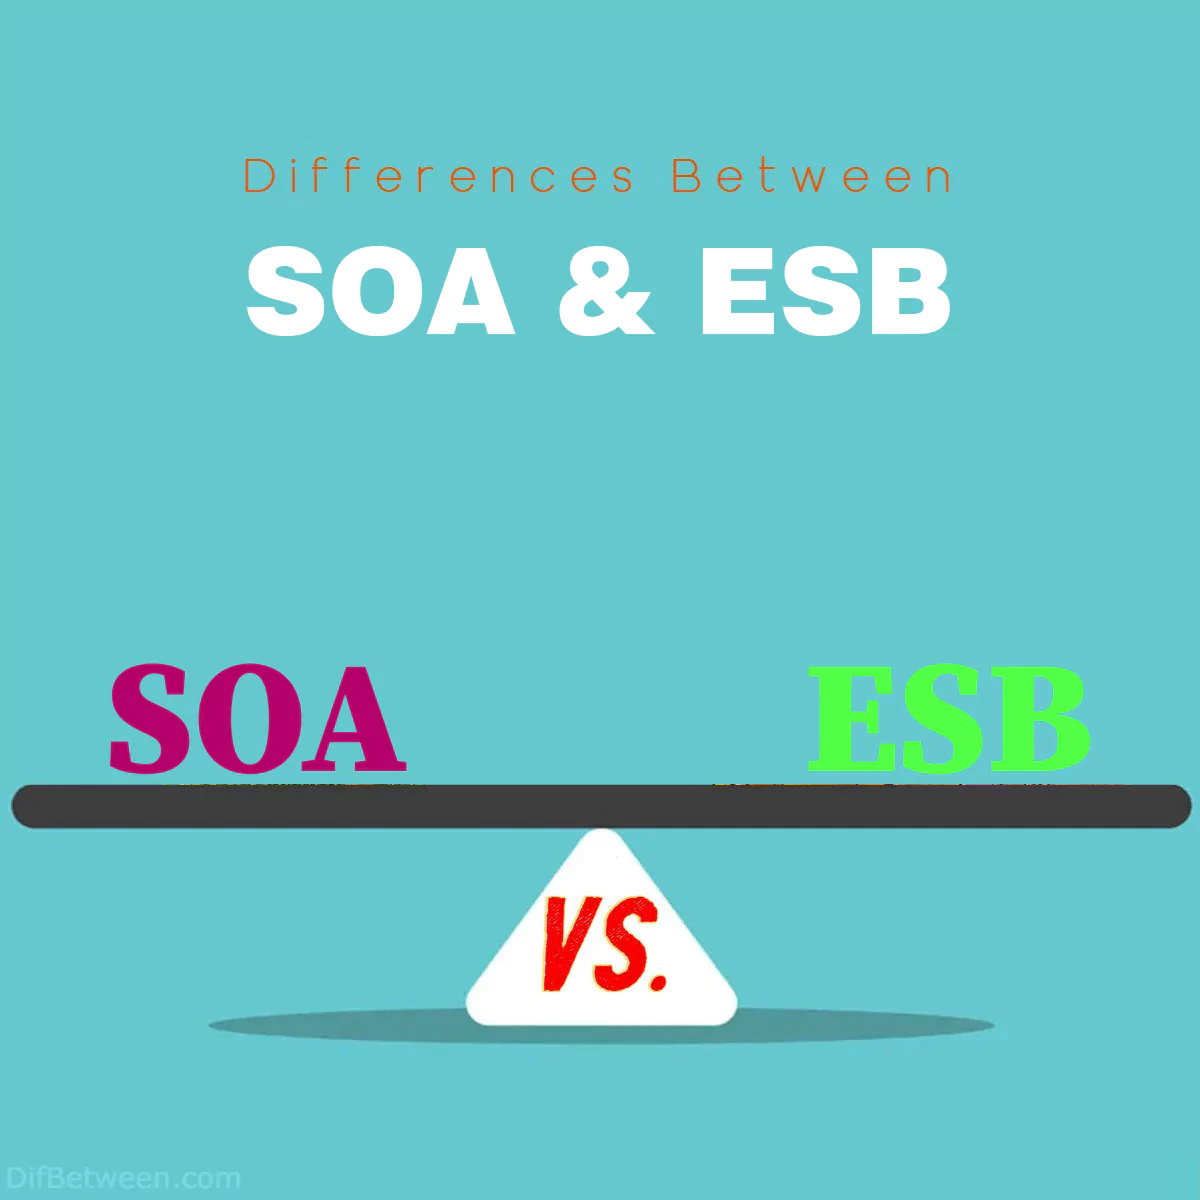 Differences Between SOA and ESB